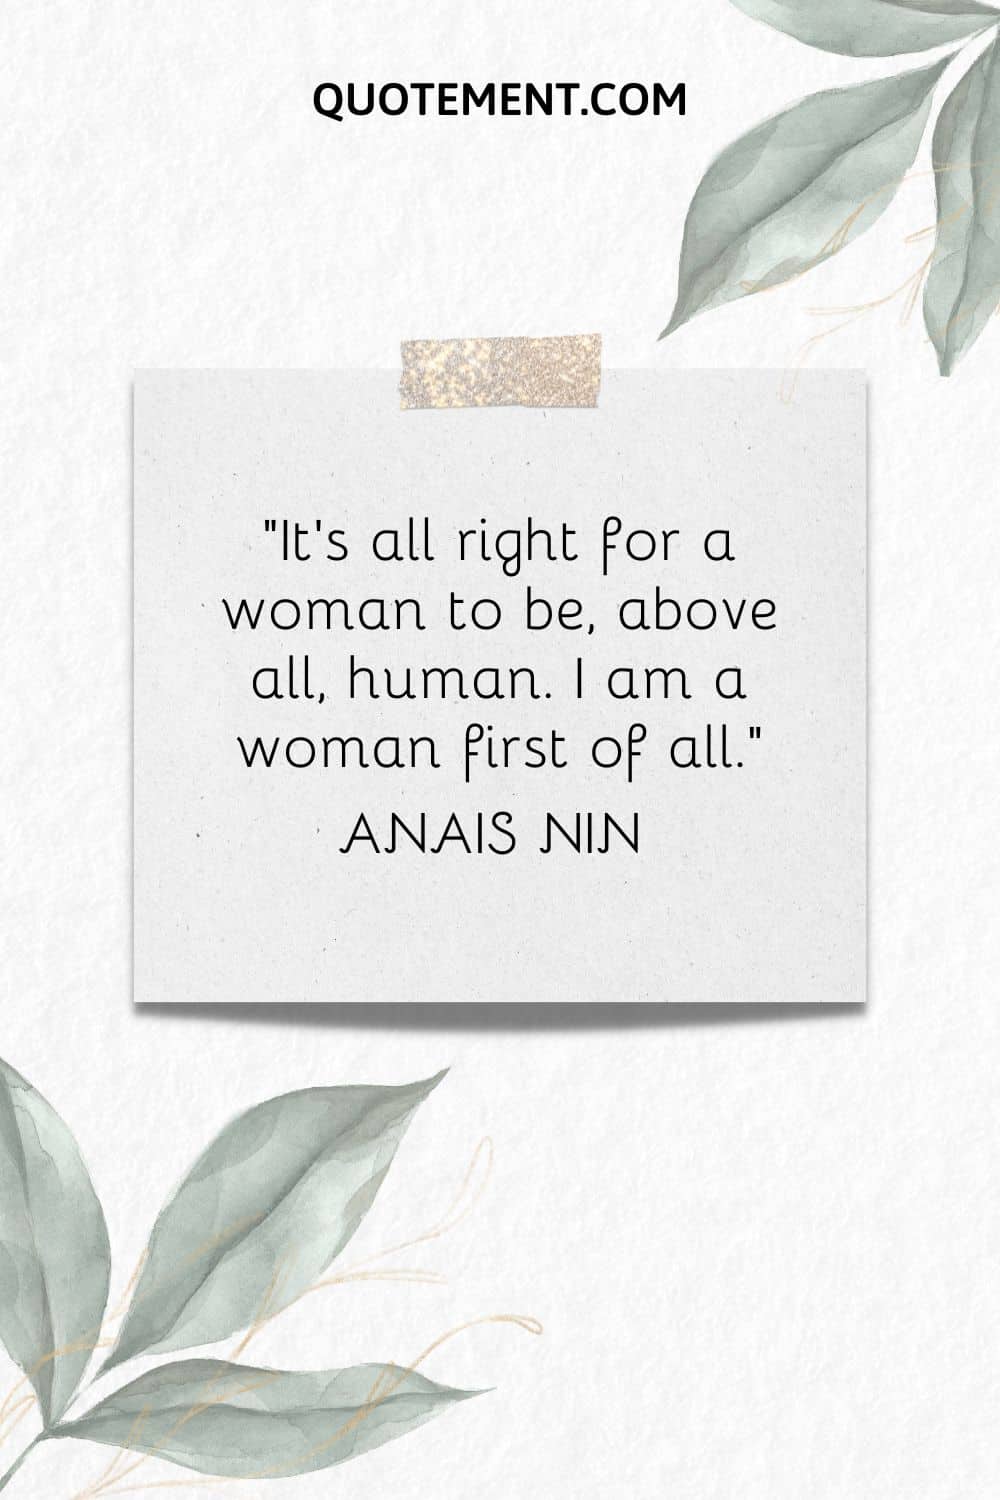 “It's all right for a woman to be, above all, human. I am a woman first of all.” — Anais Nin